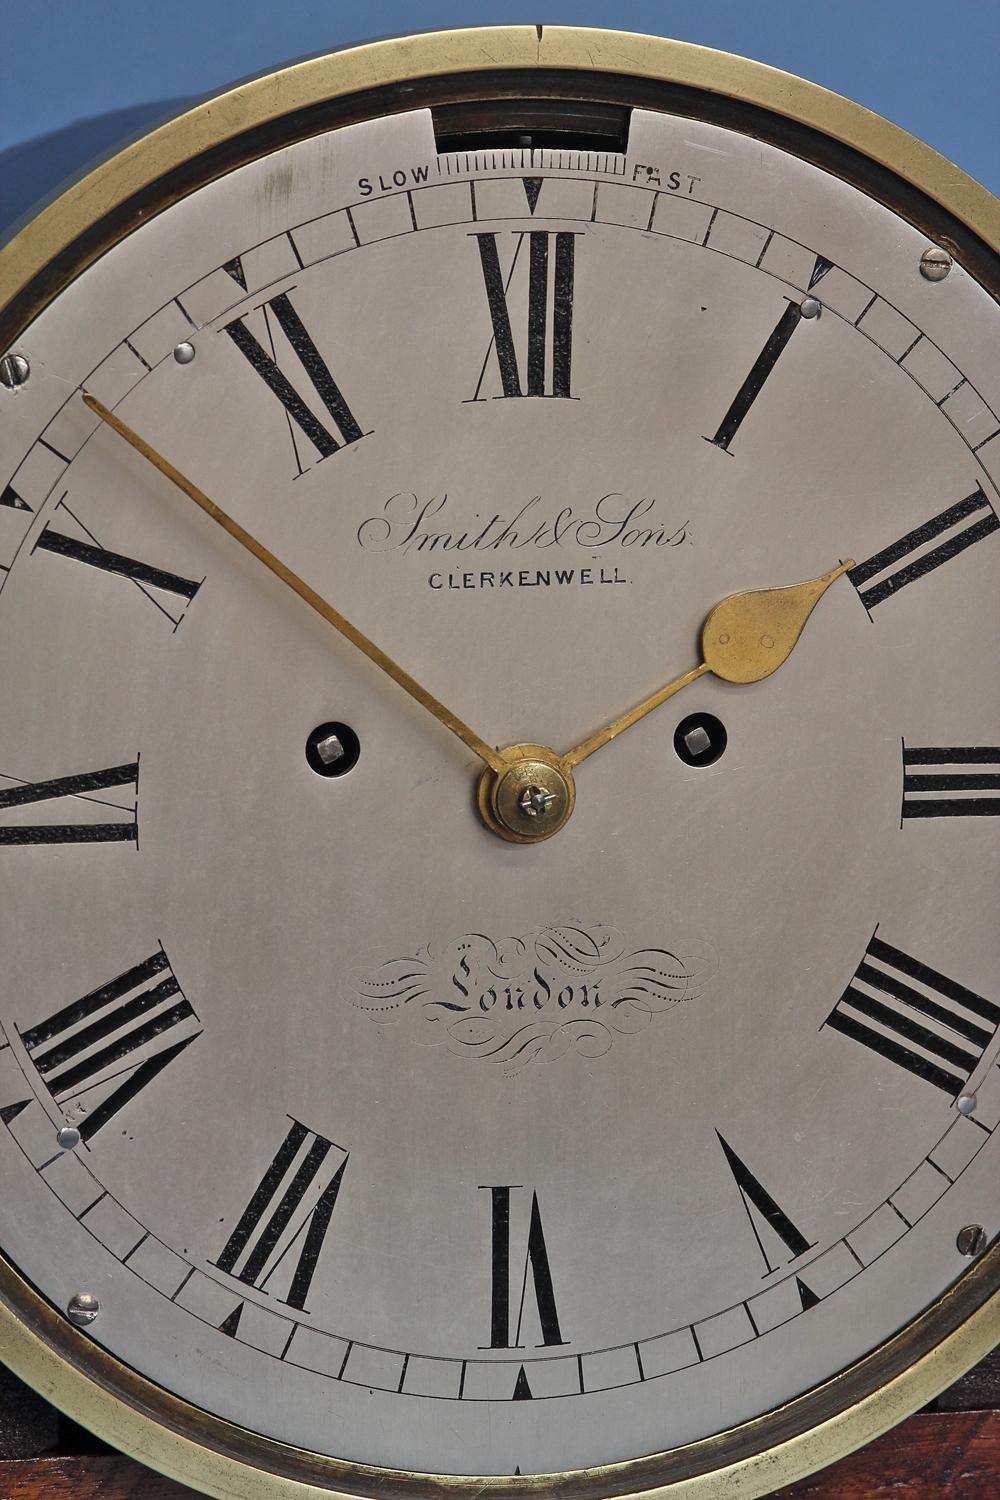 A very rare late 19th century ship’s clock by Smith and Sons that strikes true nautical time incorporating the unique striking sequences for the ‘dog watches’ on two massive bells.

Case: 
The brass cylindrical case has a fretted aperture on the